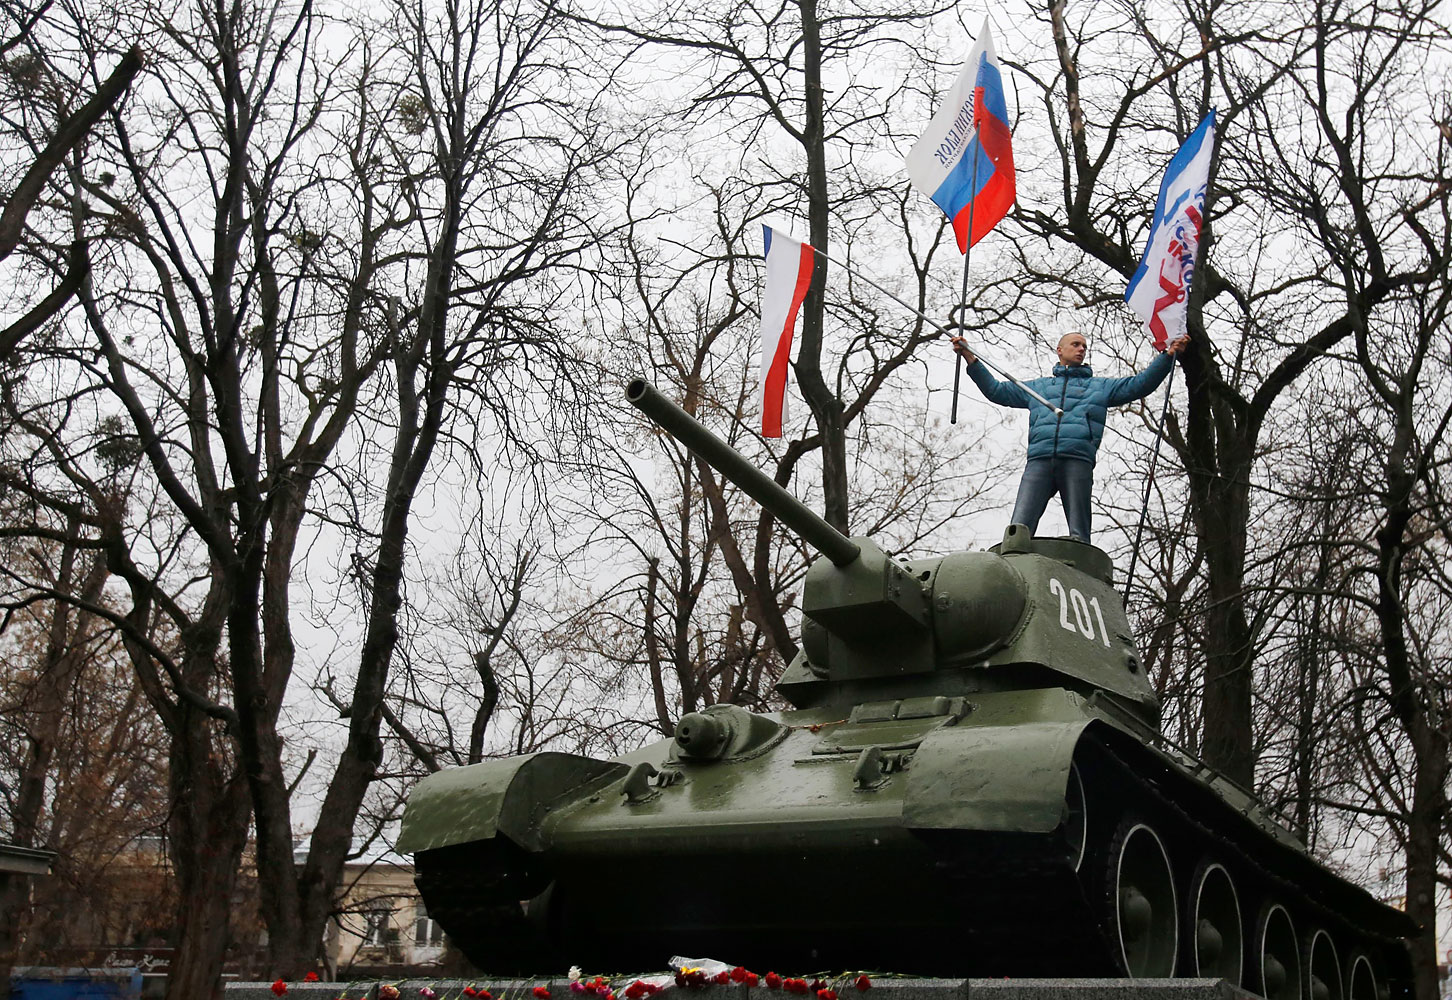 A Pro-Russian demonstrator waves Russian and Crimea flags atop an old Soviet Army tank during a protest in front of a local government building in Simferopol, Crimea, Ukraine, Feb. 27, 2014.